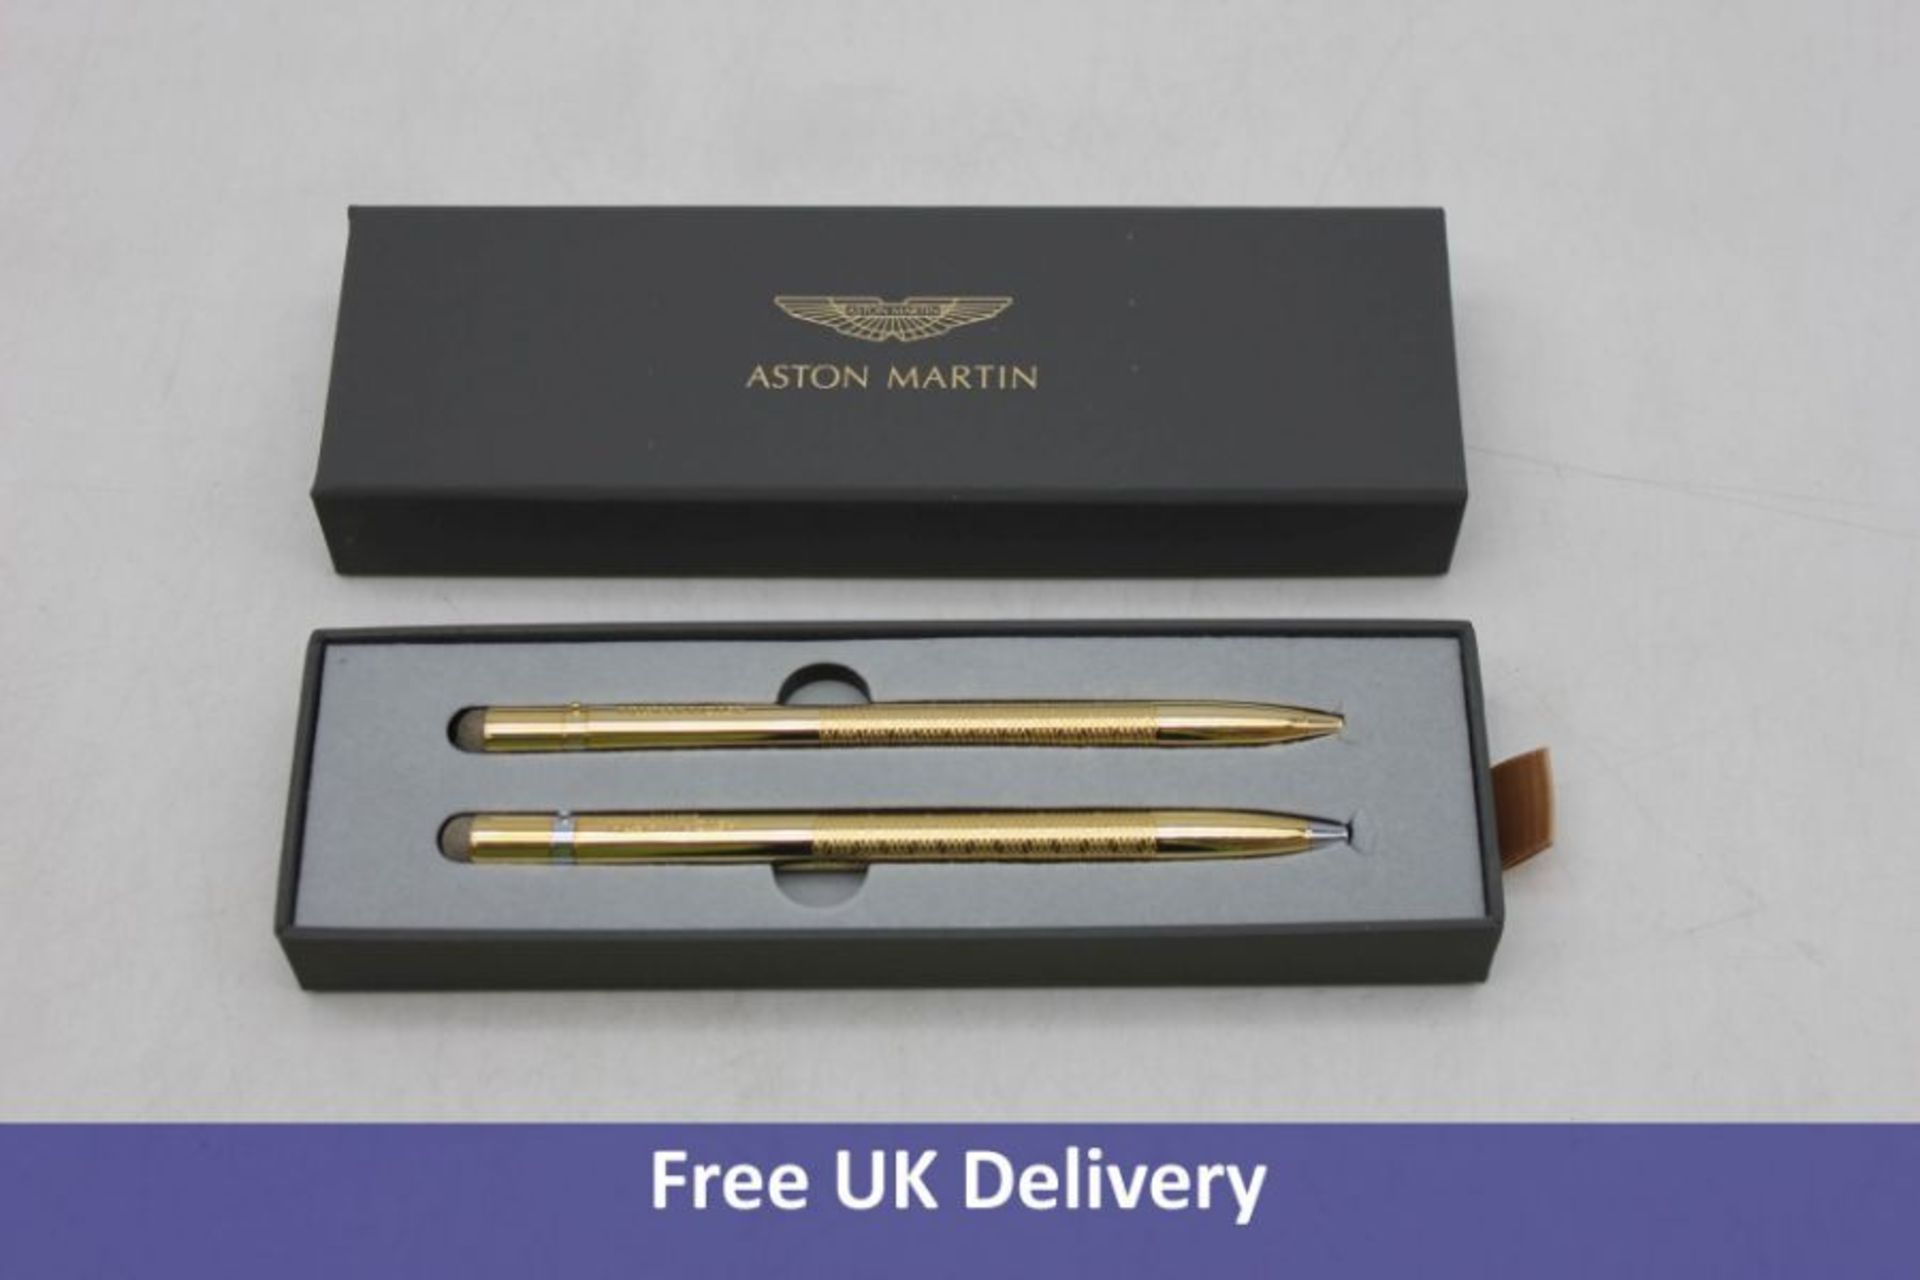 Five Aston Martin Stylus Ball Pen and Roller, Gold - Image 2 of 5